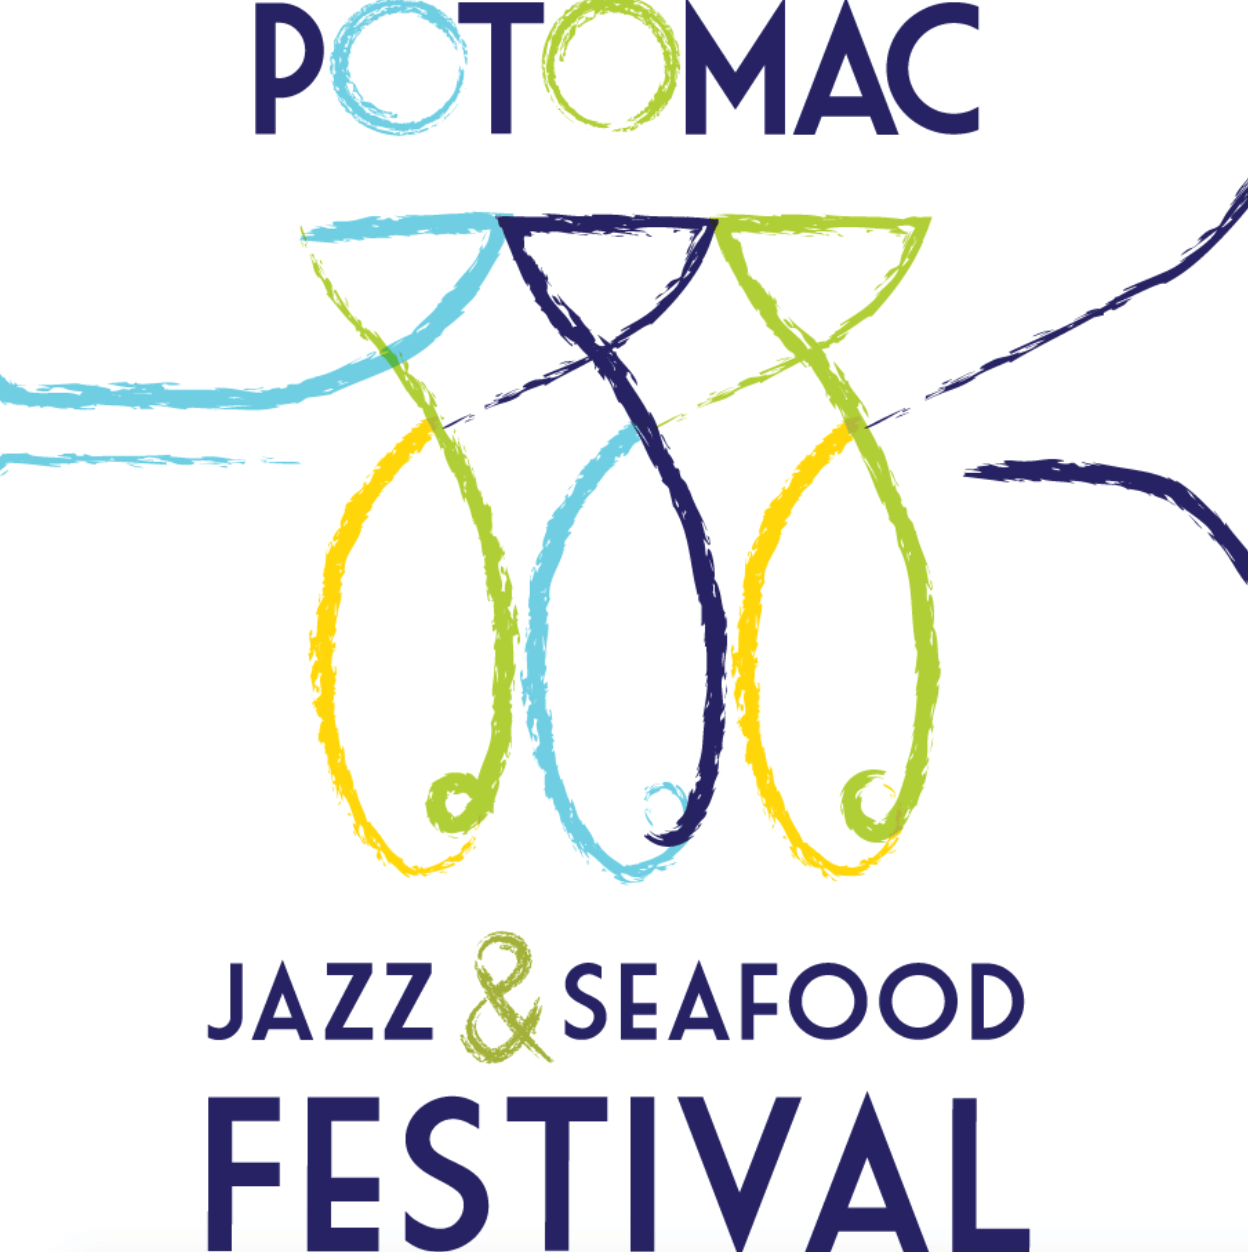 Potomac Jazz and Seafood Festival